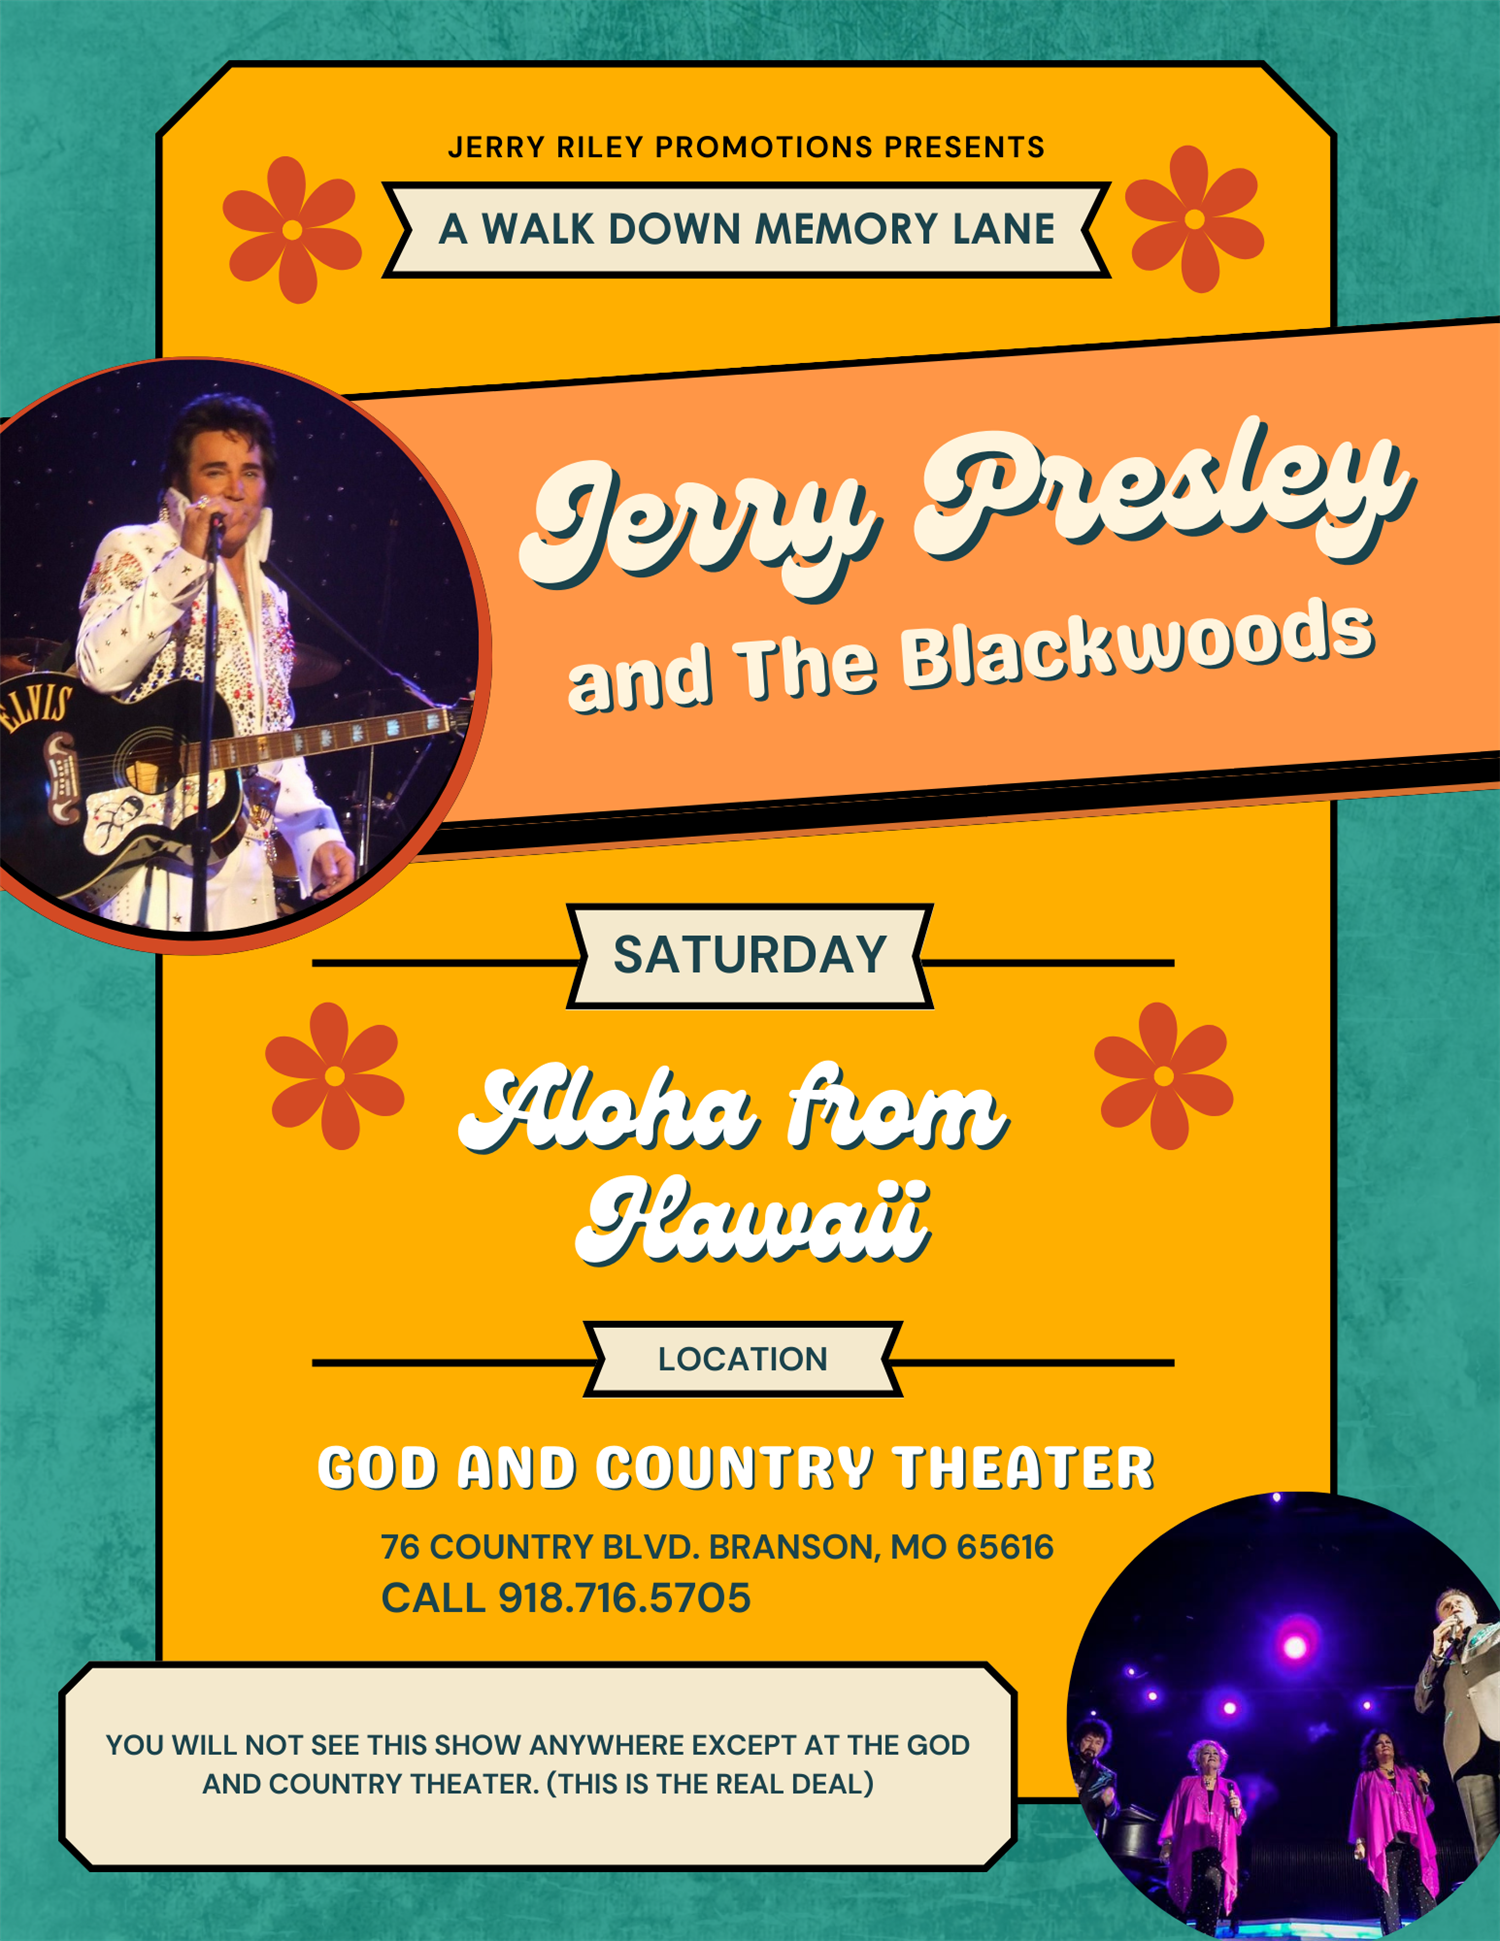 Jerry Presley & The Blackwoods Preform Elvis' Aloha From Hawaii Concert Every Saturday on Oct 02, 00:00@God and Country Theater - Pick a seat, Buy tickets and Get information on Jerry Riley Promotions 